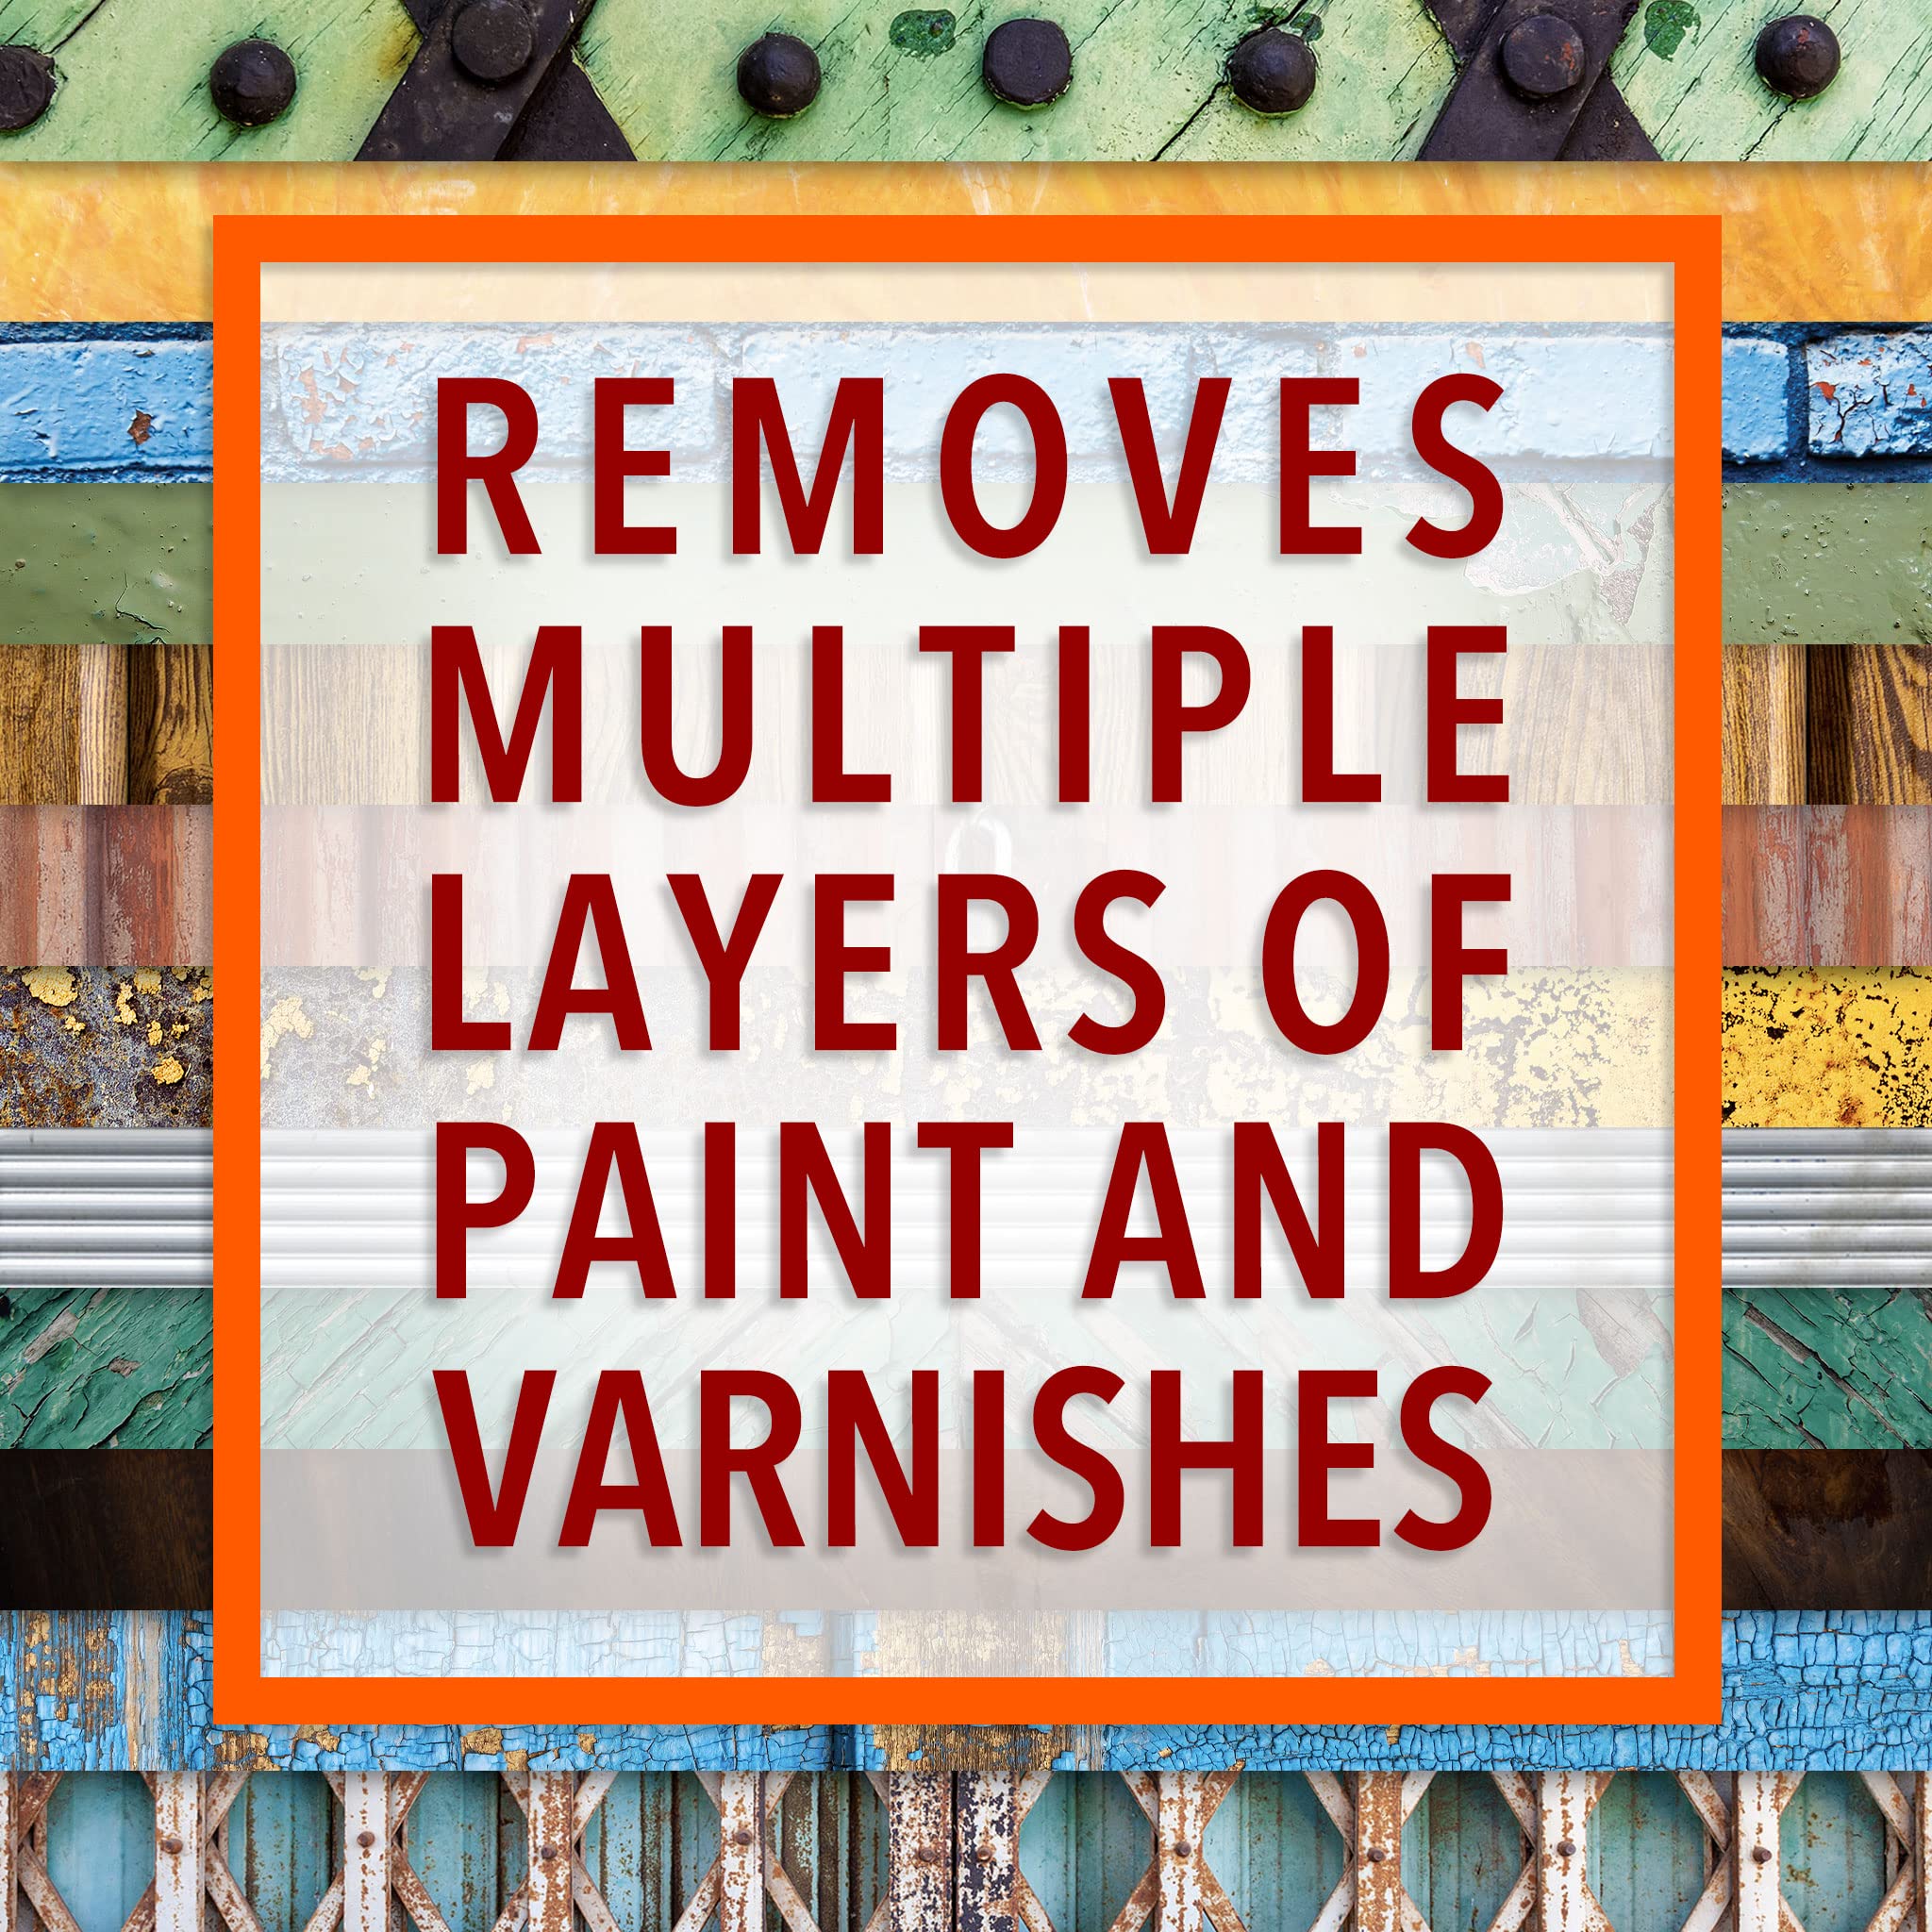 Smart 'n Easy Citrus Paint & Varnish Remover Gel - Strips up to 15+ Layers of Acrylic, Latex, Oil, & Water-Based Paints, Varnishes, & Coatings in One Application - Orange Scent - DIY Friendly - 1/2 Gallon